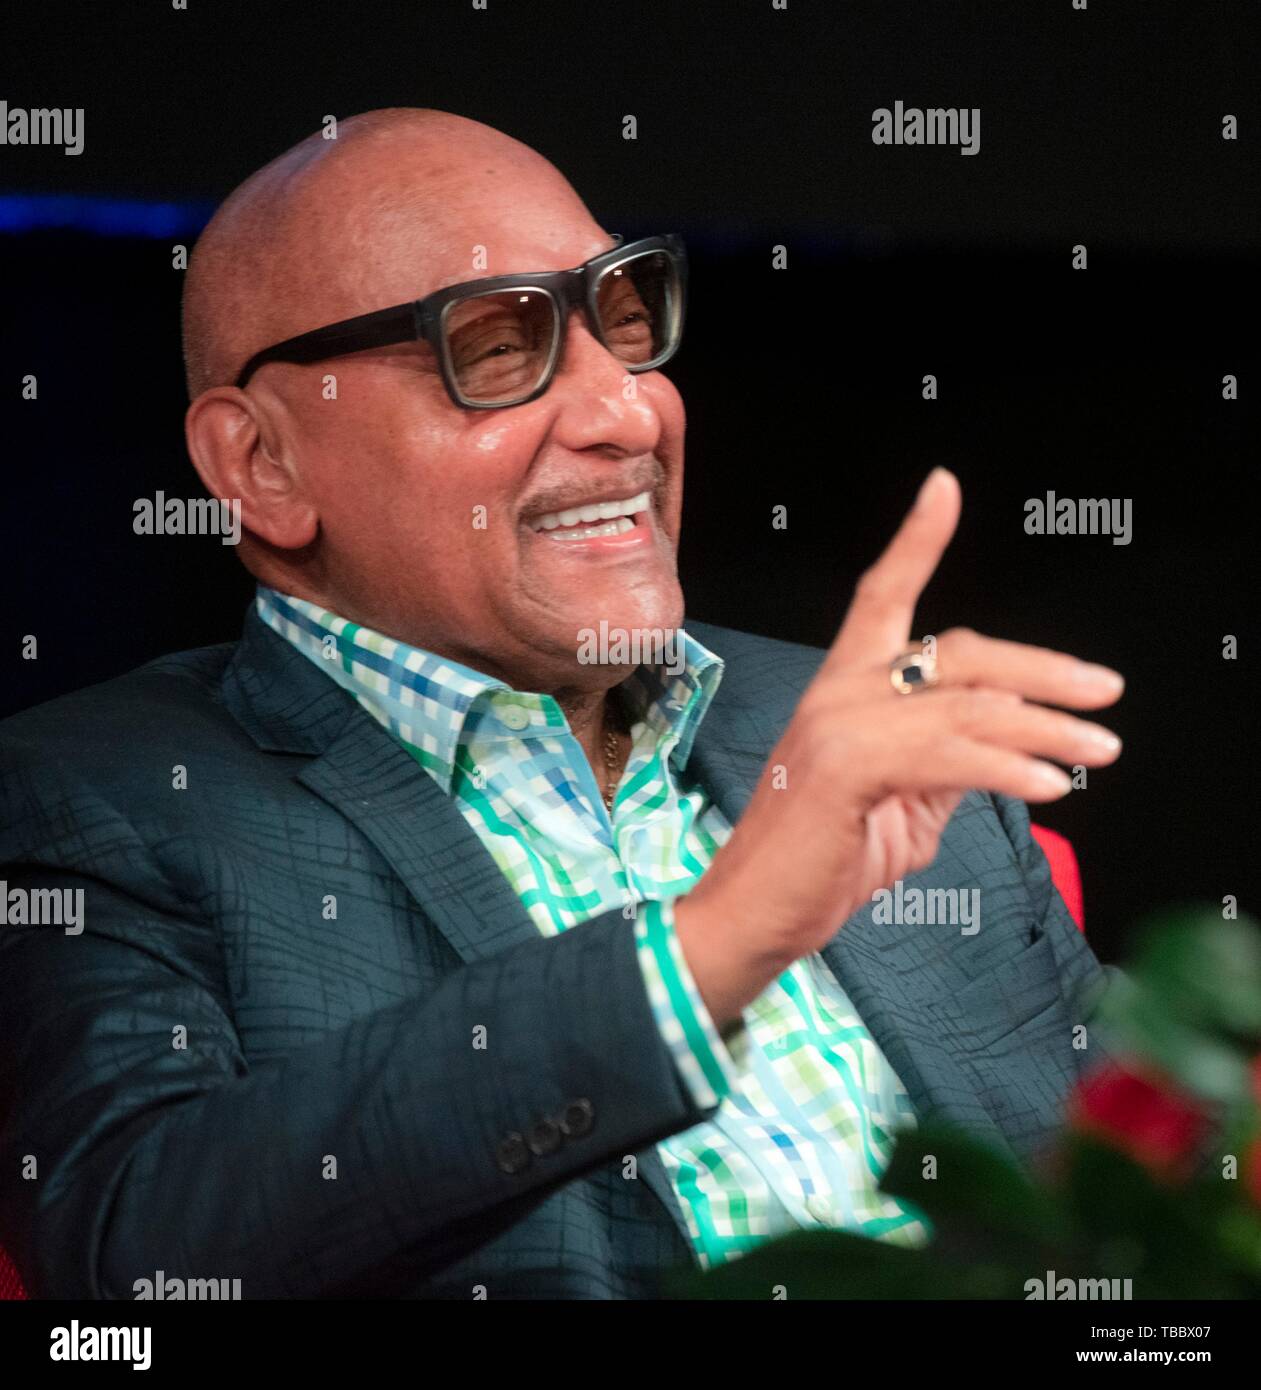 Duke Fakir, founding member of The Four Tops, discusses music as activism and social expression during the Summit on Race in America at the LBJ Presidential Library April 10, 2019 in Austin, Texas. Stock Photo